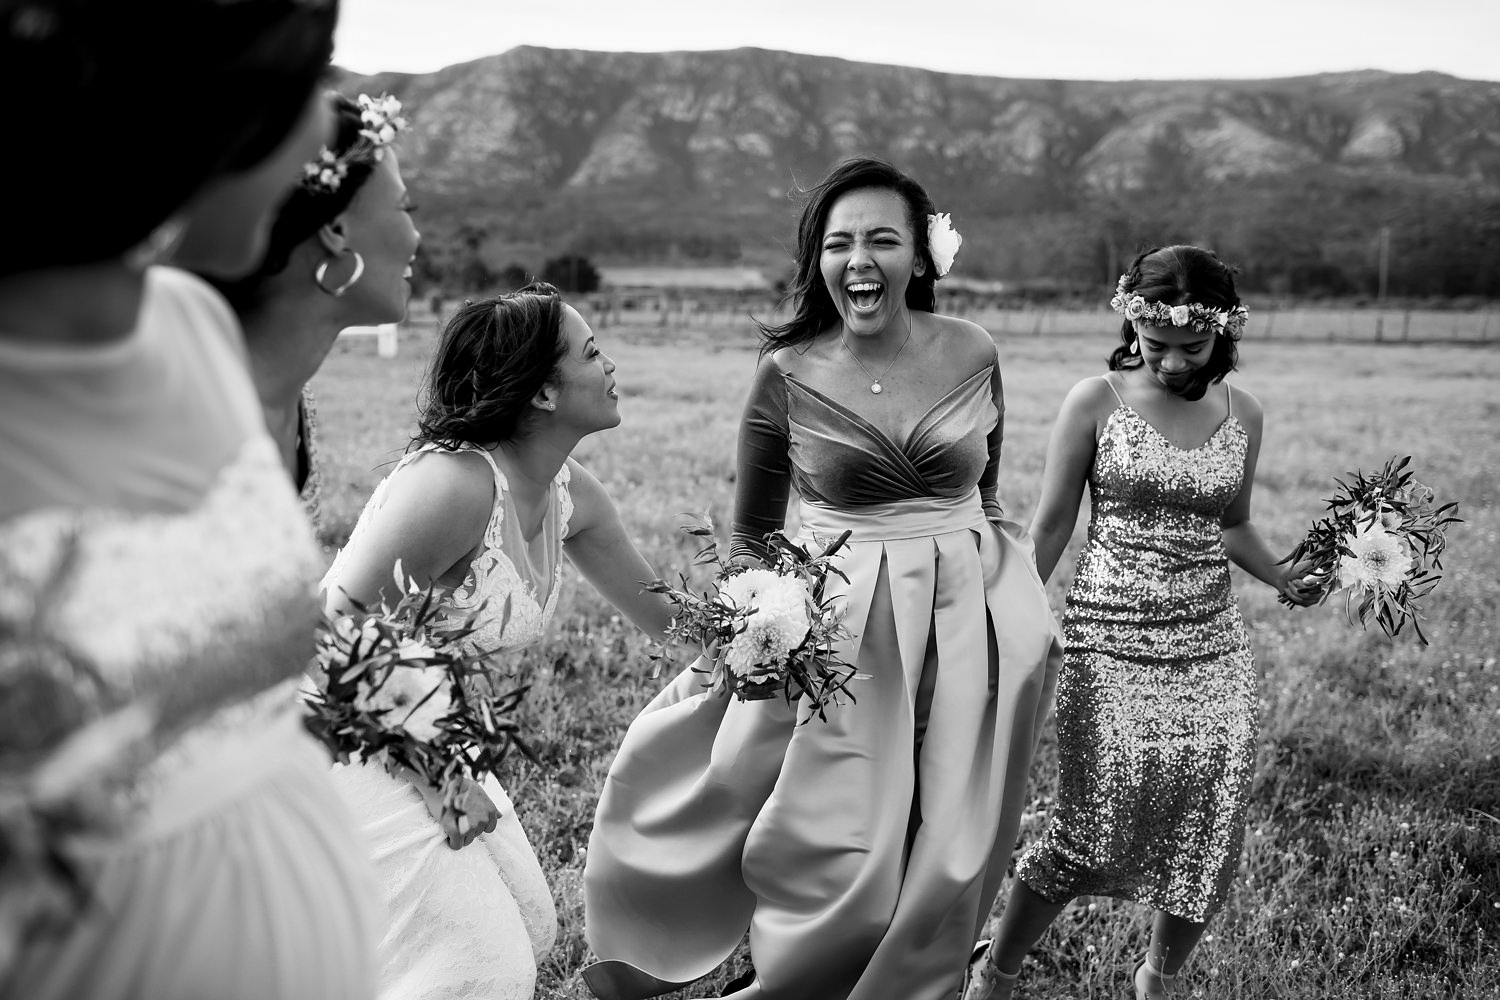 Playful bride and her bridesmaids during their entourage photo shoot in a field by wedding photographer in South Africa, Niki M Photography.